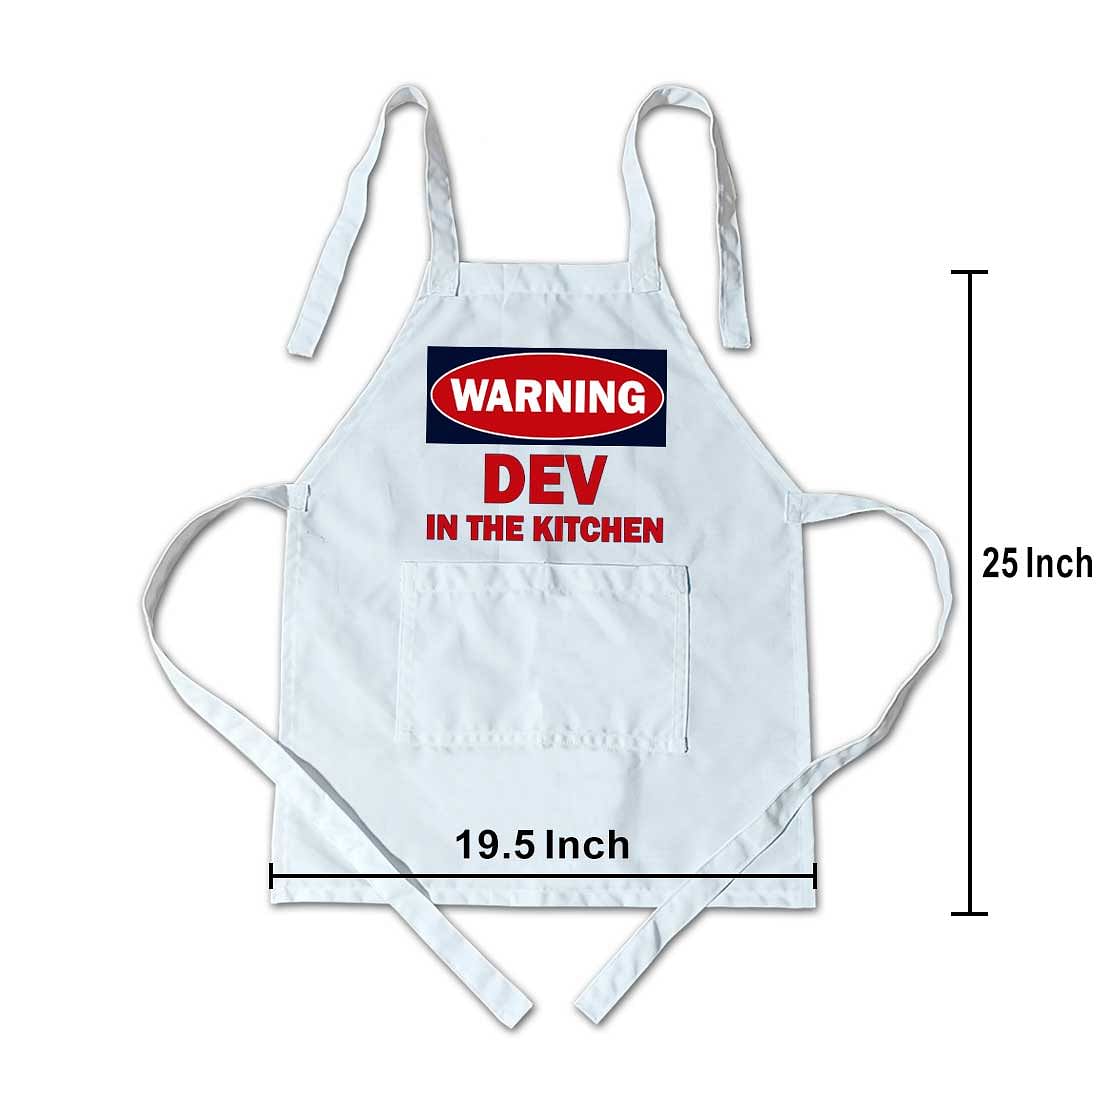 Customized Apron for your Kids - Warning Nutcase